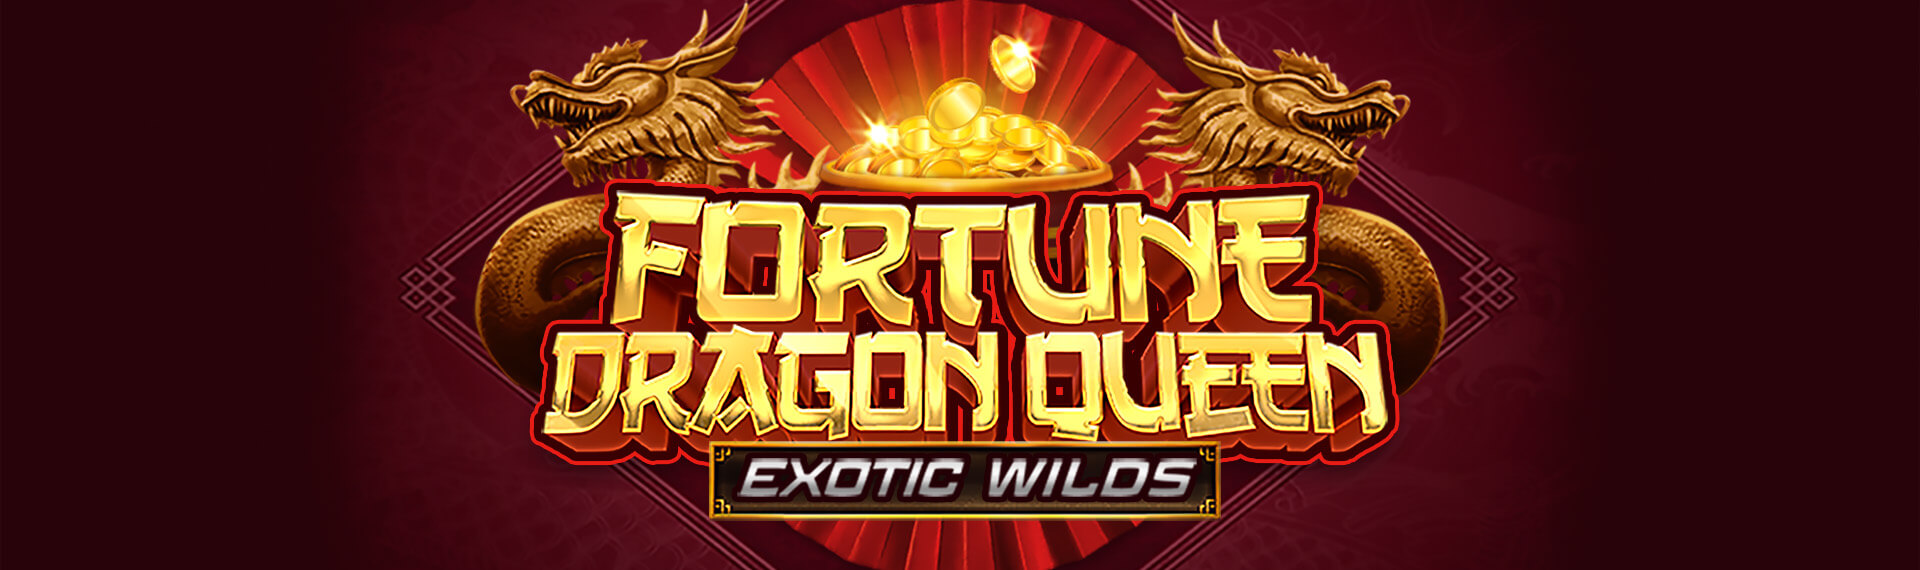 Fortune Dragon Queen Exotic Wilds Screenshot <br />
<b>Notice</b>:  Undefined variable: key in <b>/var/www/html/wp-content/themes/armadillo/page-game.php</b> on line <b>37</b><br />
1